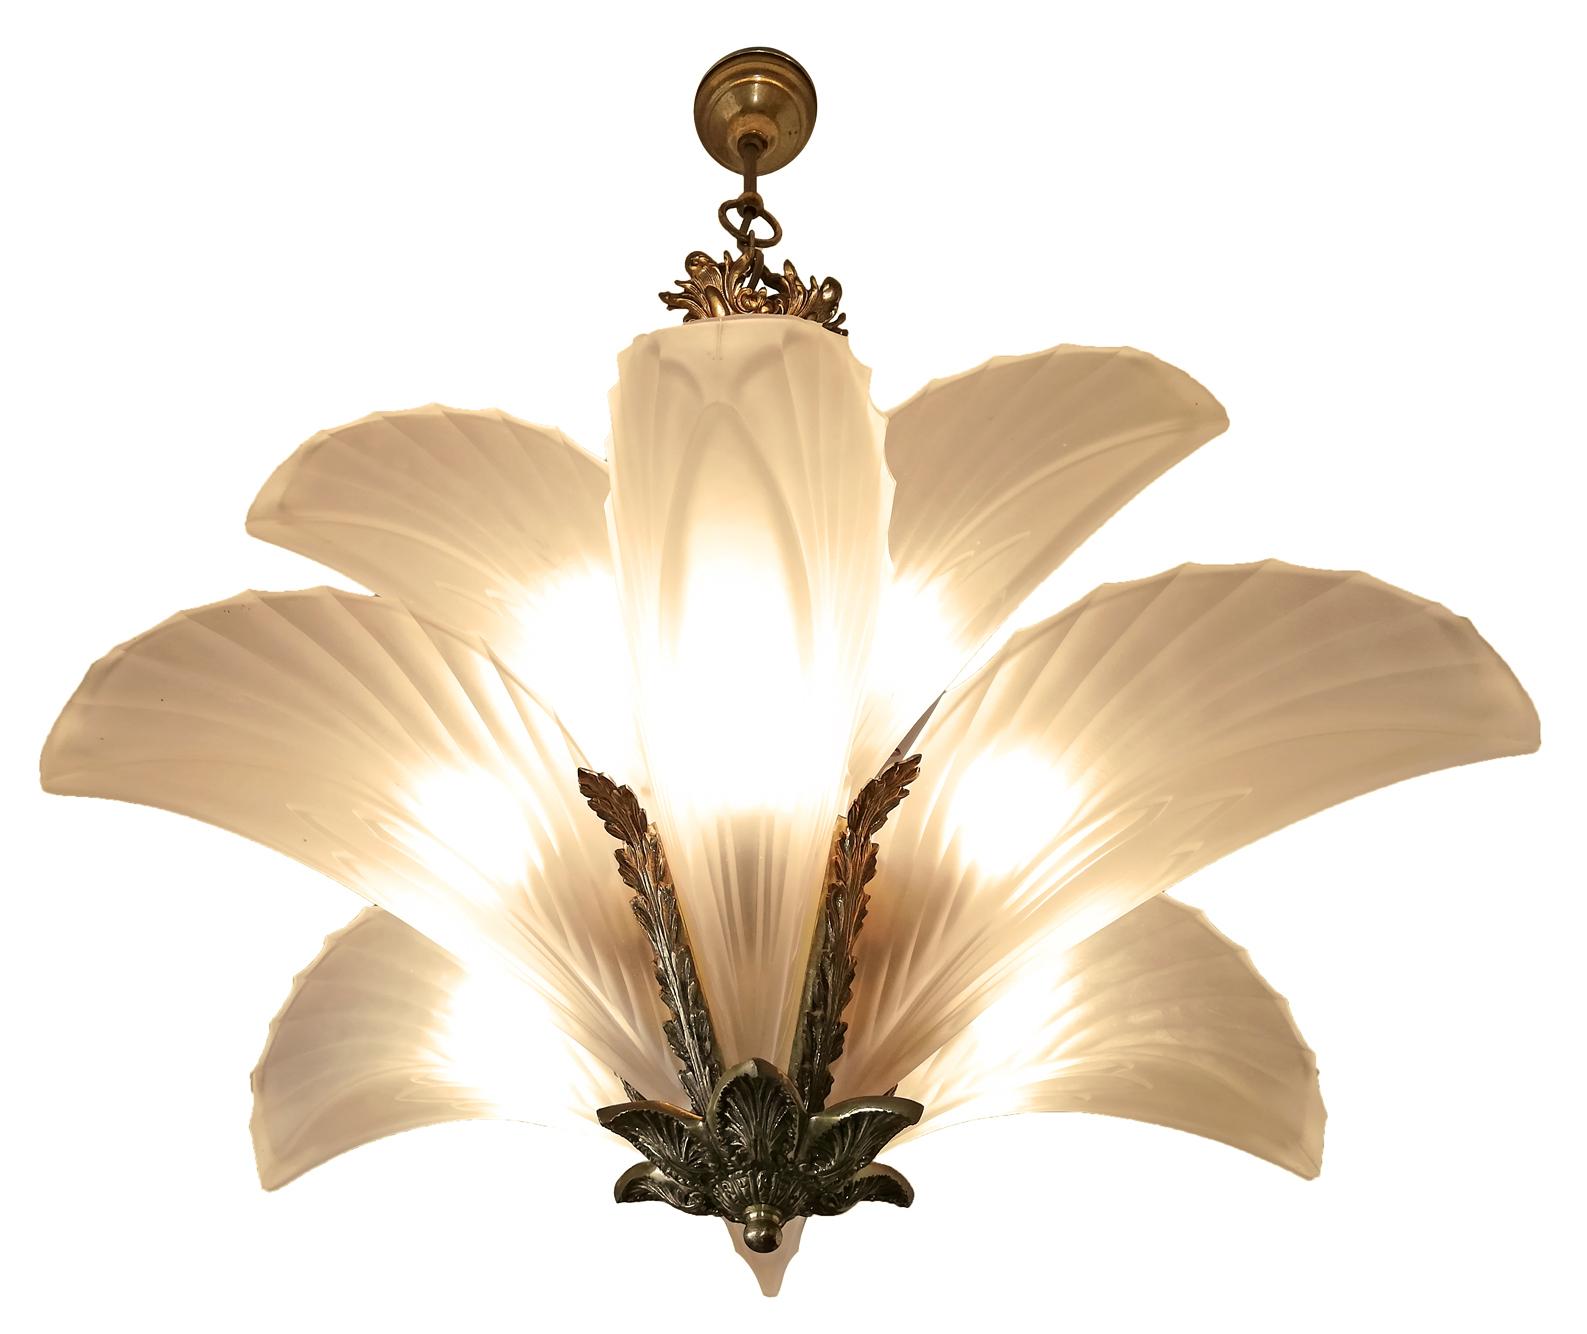 Antique large French Art Nouveau/Art Deco gilt bronze and frosted glass leaves lamp shades chandelier.
Fabulous Palm Tree Hollywood Regency with two layers and nine-light bulbs chandelier
Measures: 
Diameter 26 in/ 66 cm
Height 36 in/ 90 cm